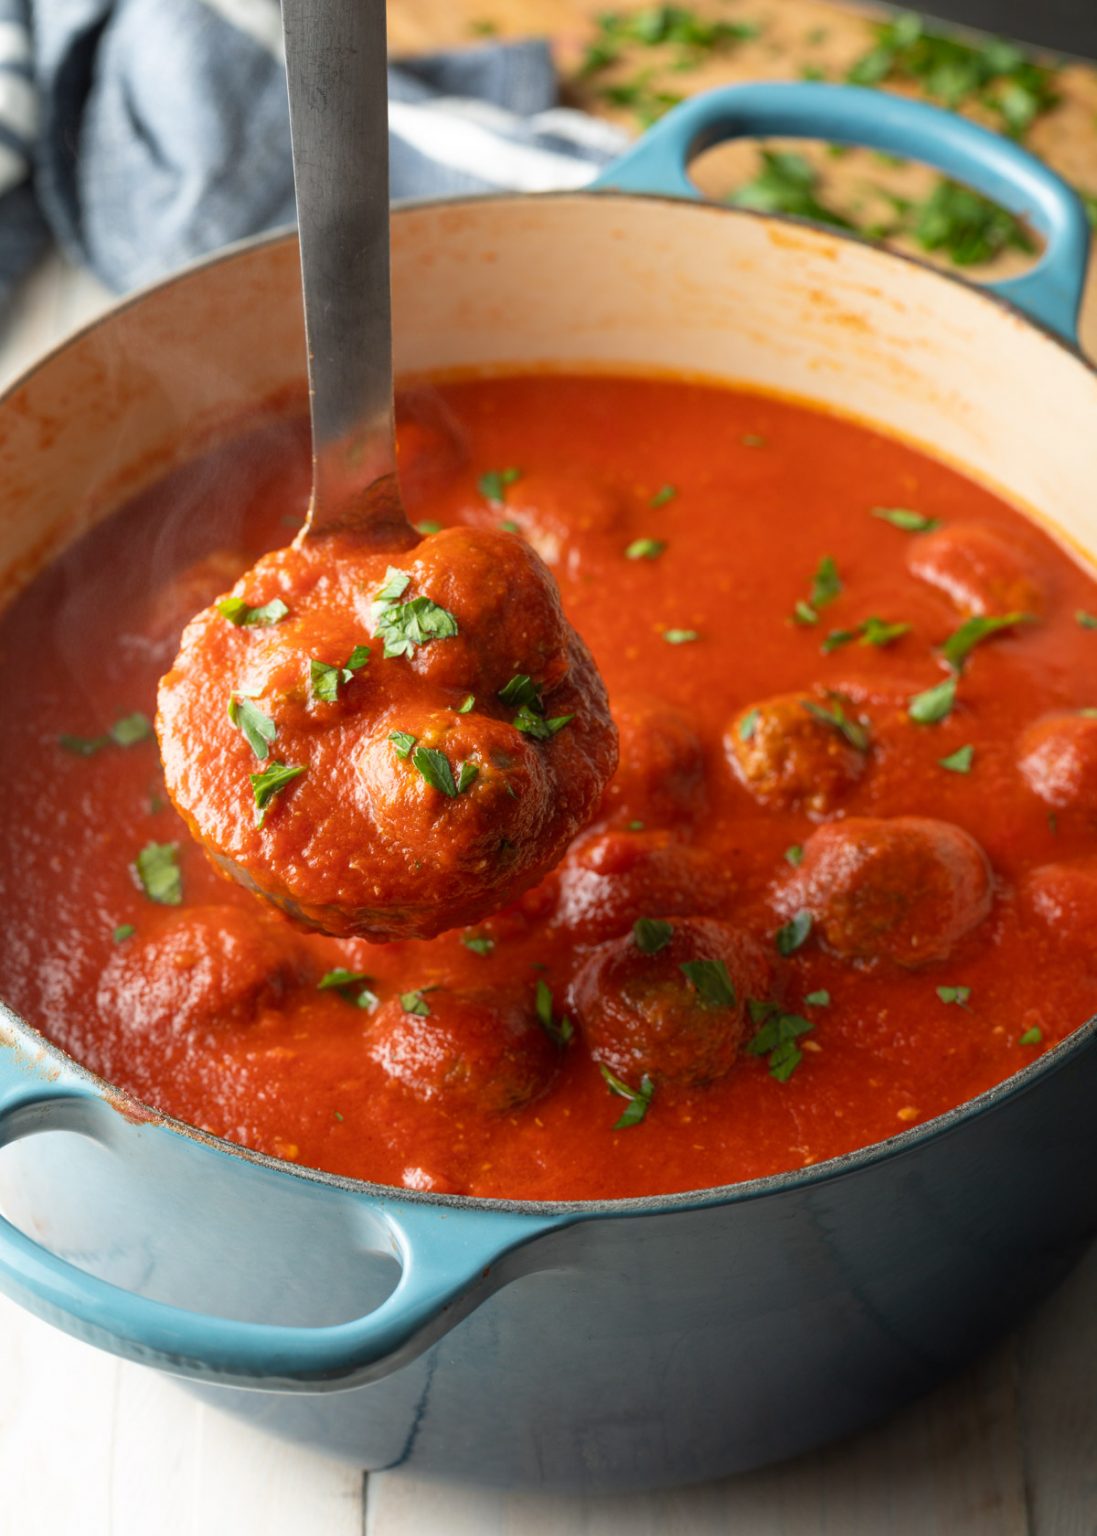 Classic Italian Meatballs or Sweet 'n Sour (Grape Jelly) Meatballs - Kitcheneez Mixes & More!